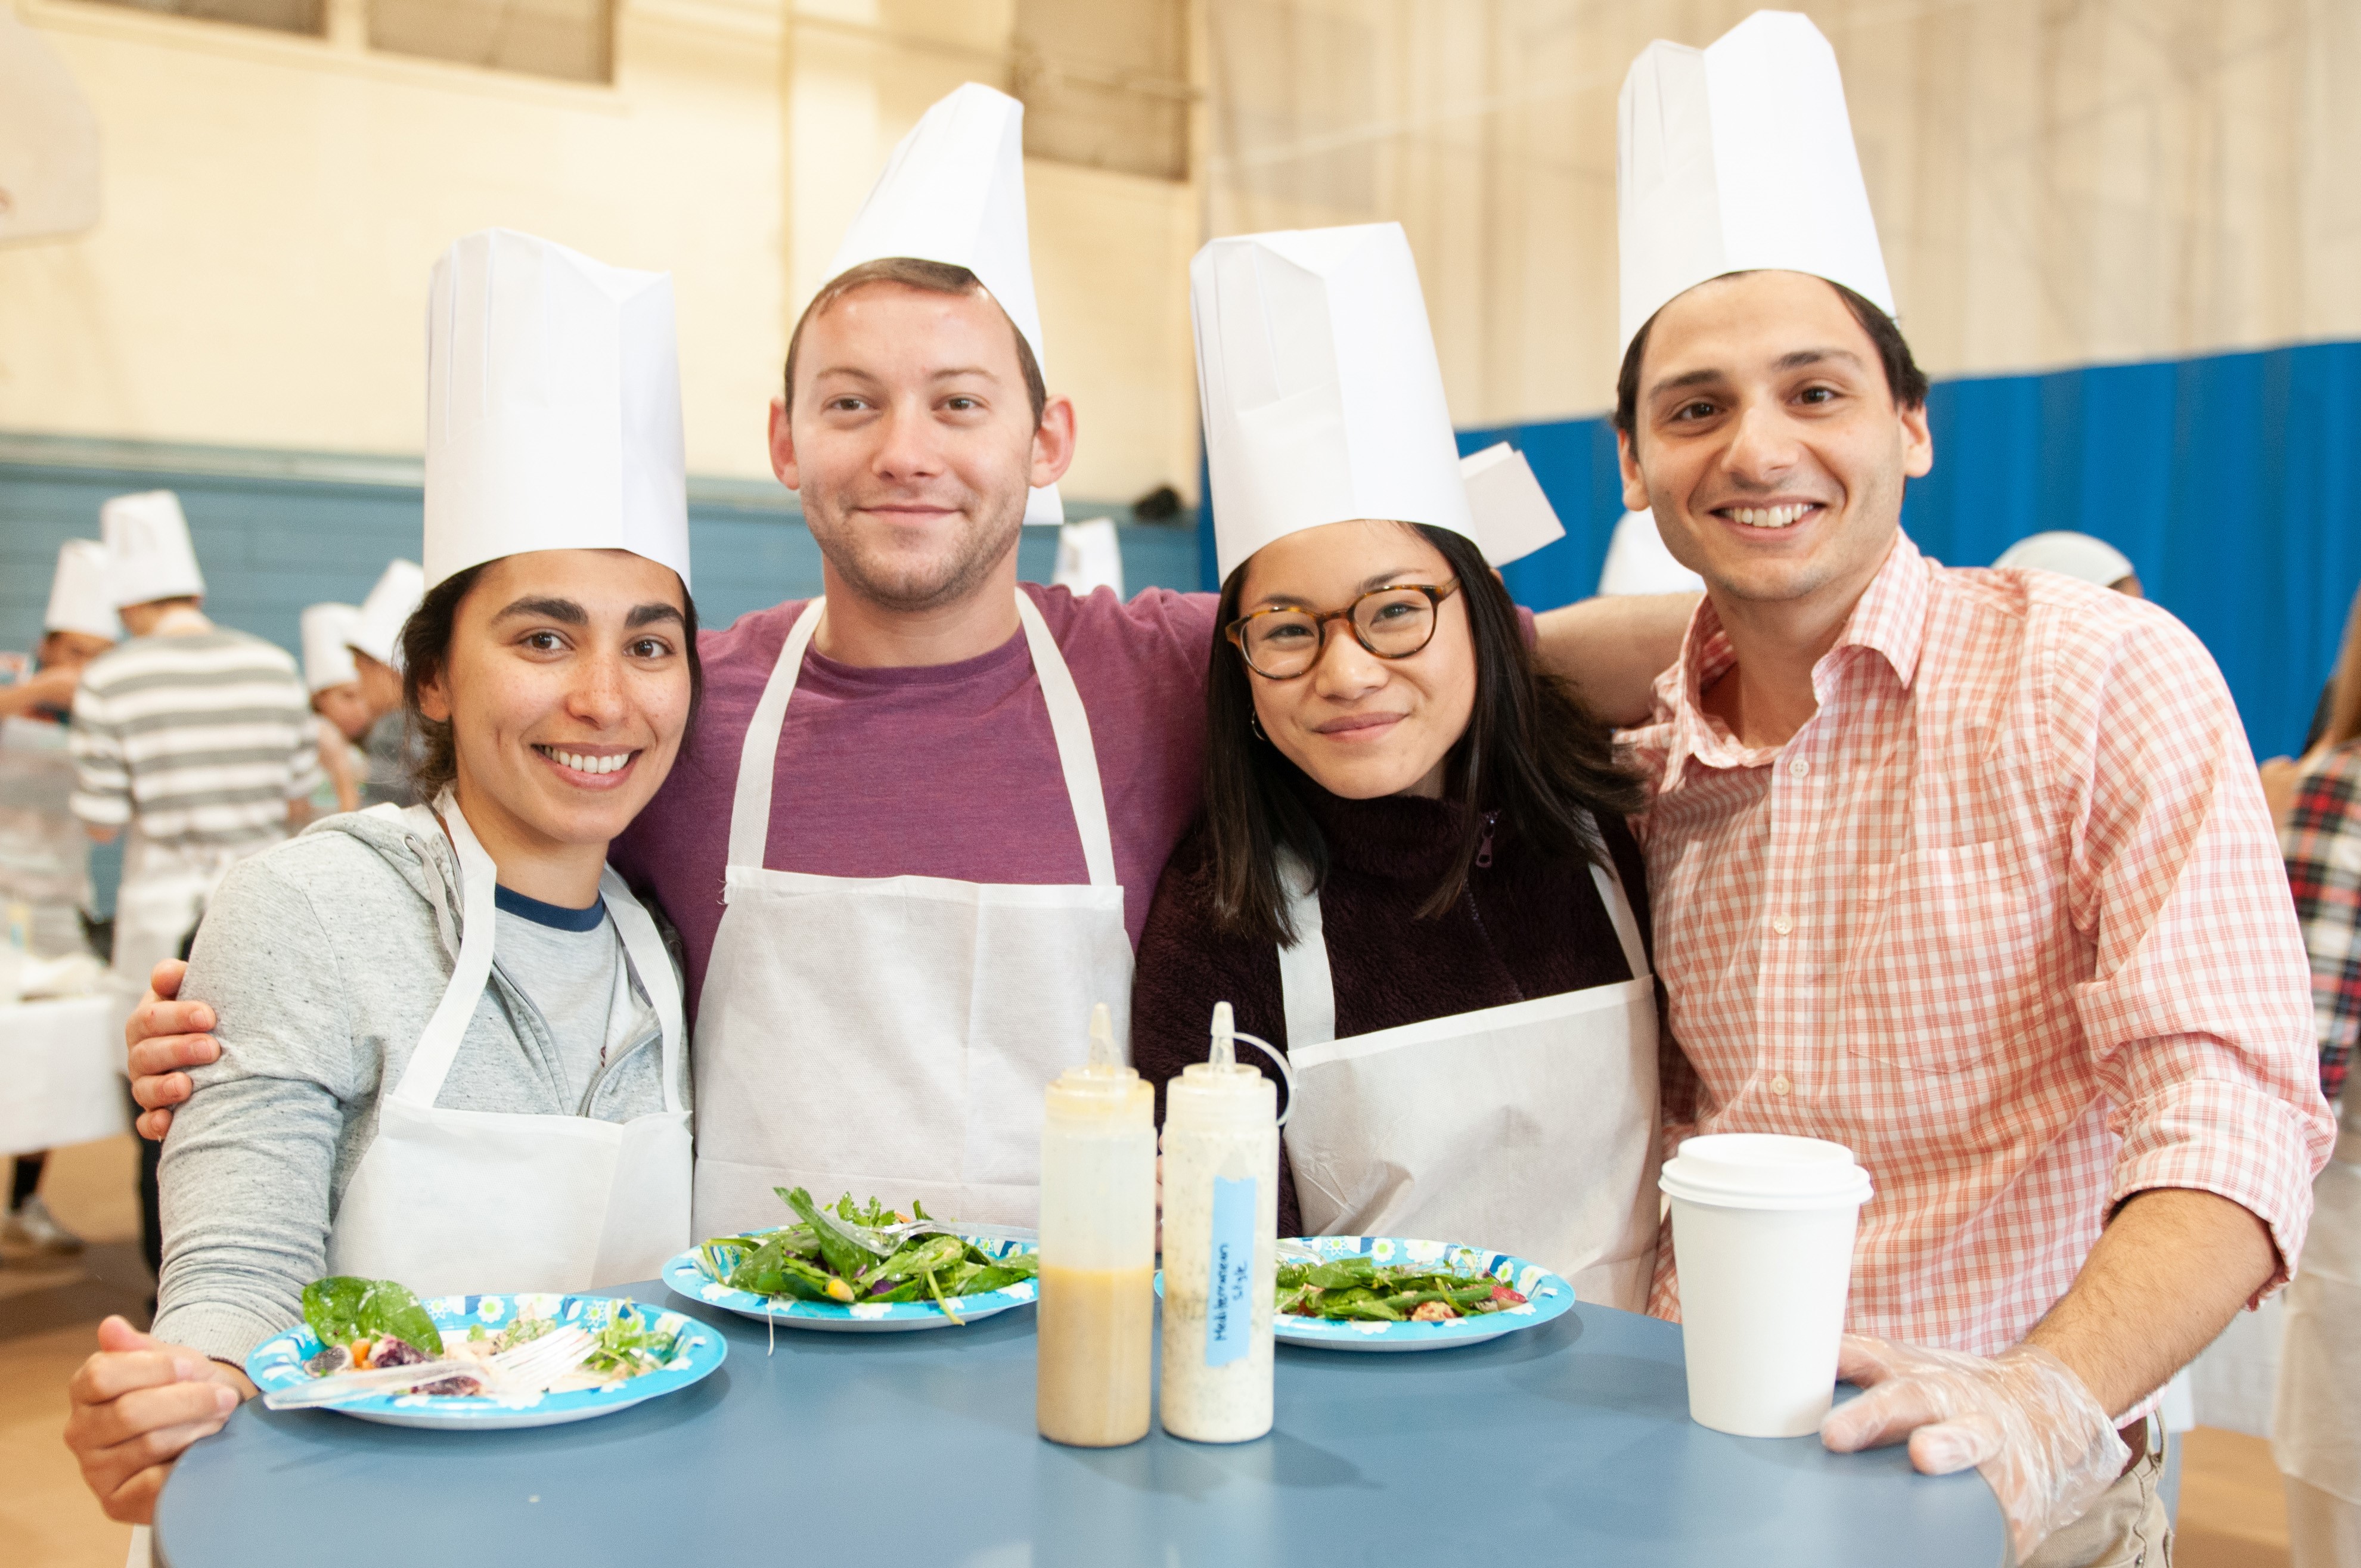 Four student doctors wearing chefs hats stand together eating salads and vegetables on paper plates